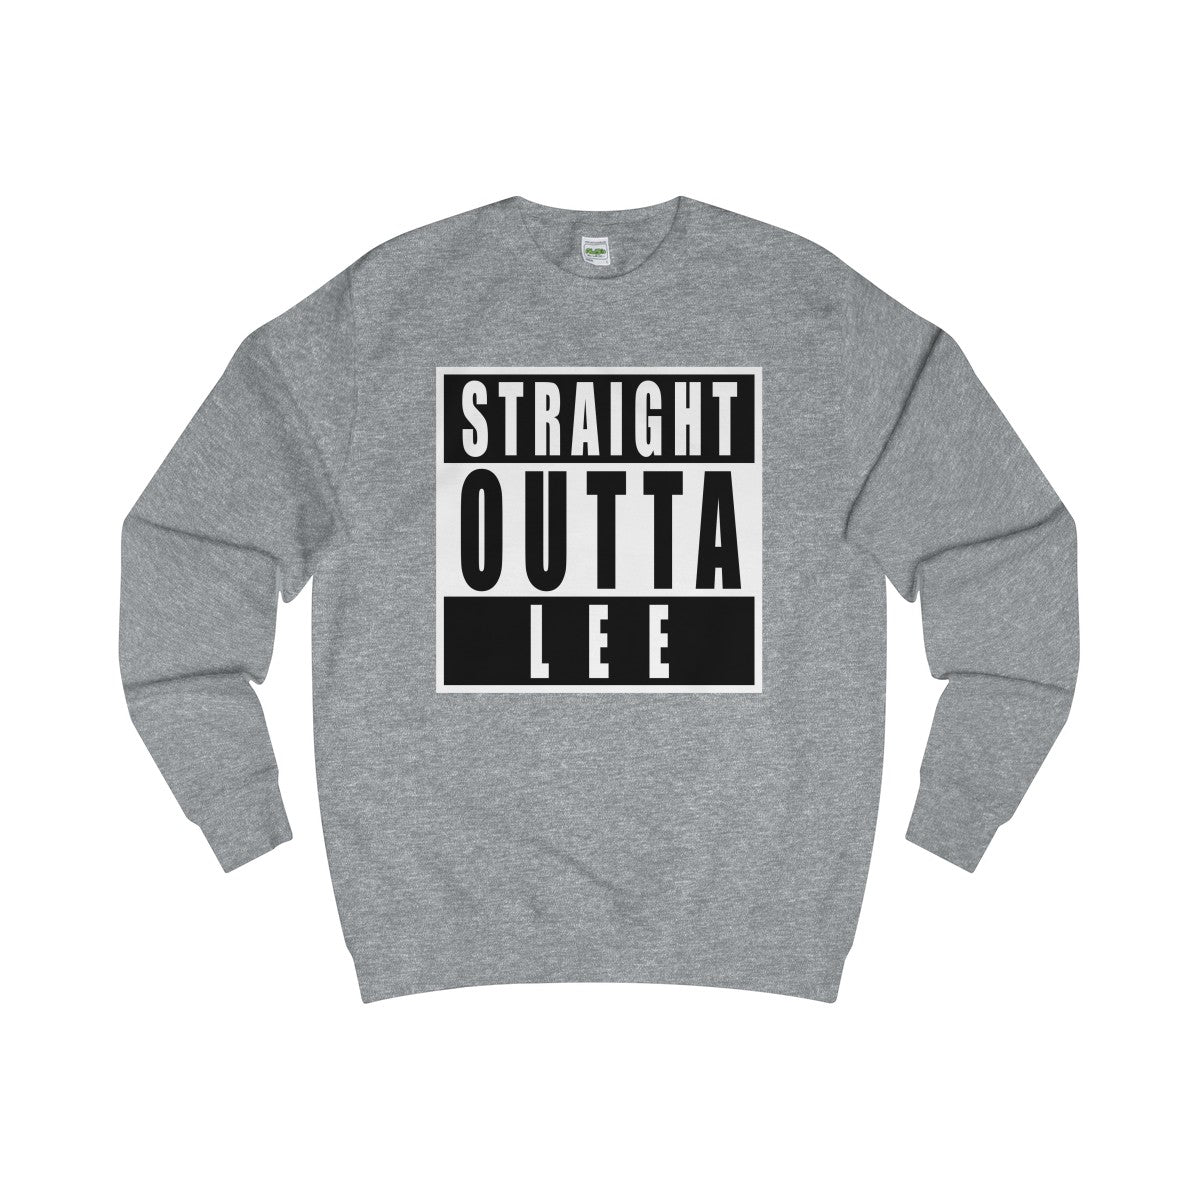 Straight Outta Lee Sweater